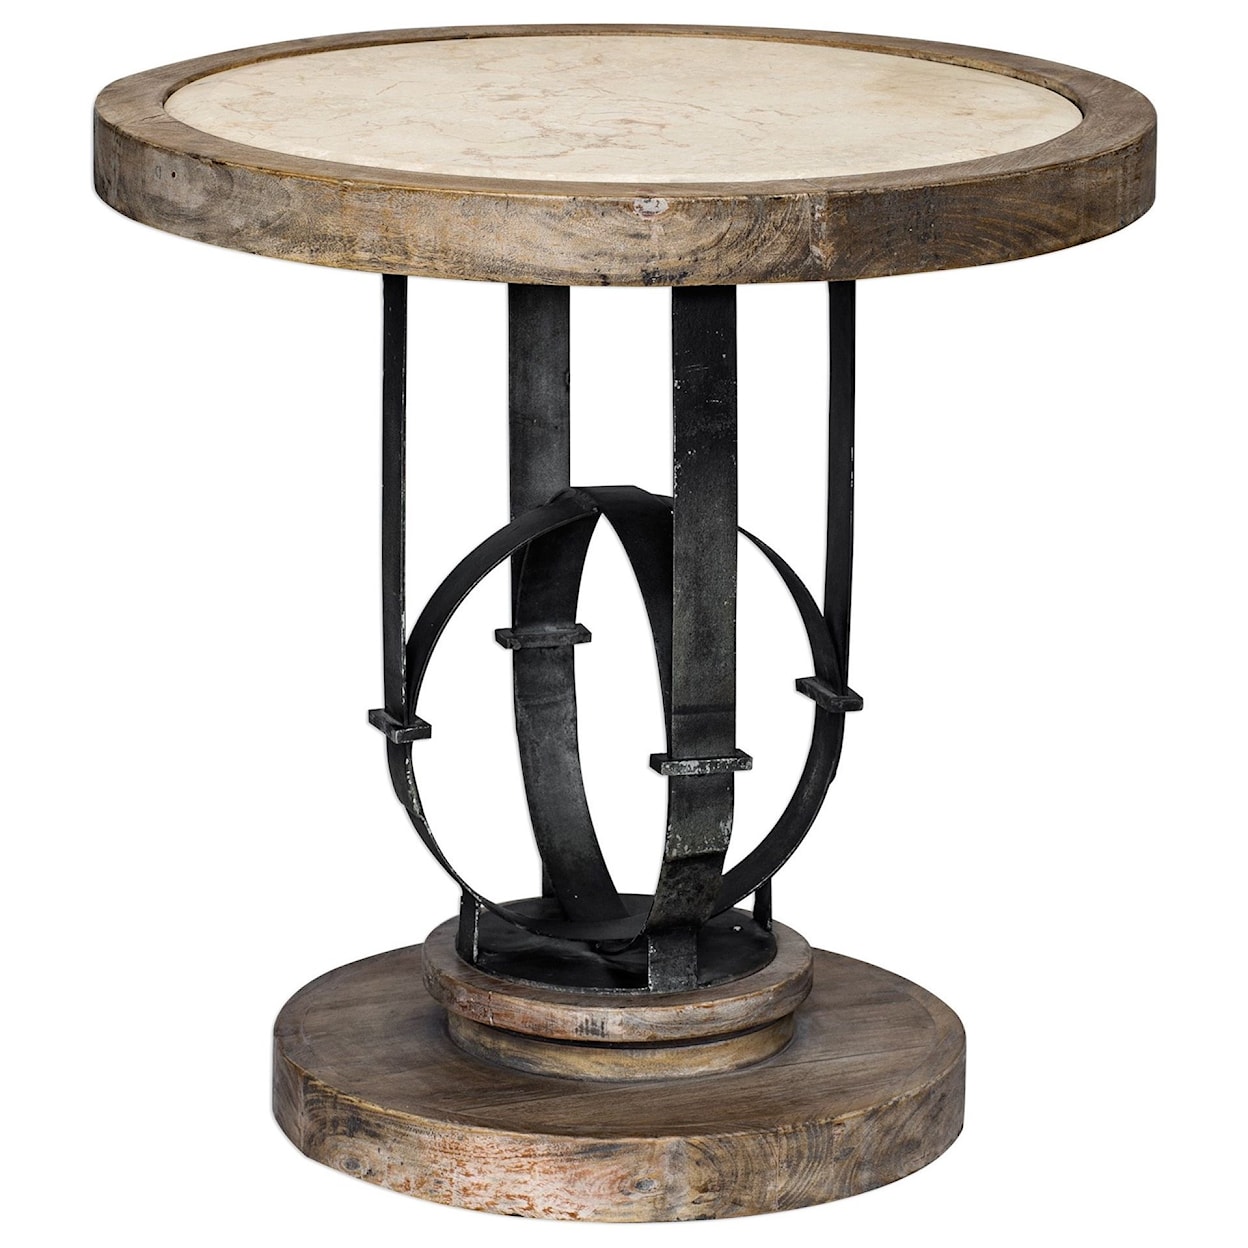 Uttermost Accent Furniture - Occasional Tables Sydney Light Oak Accent Table